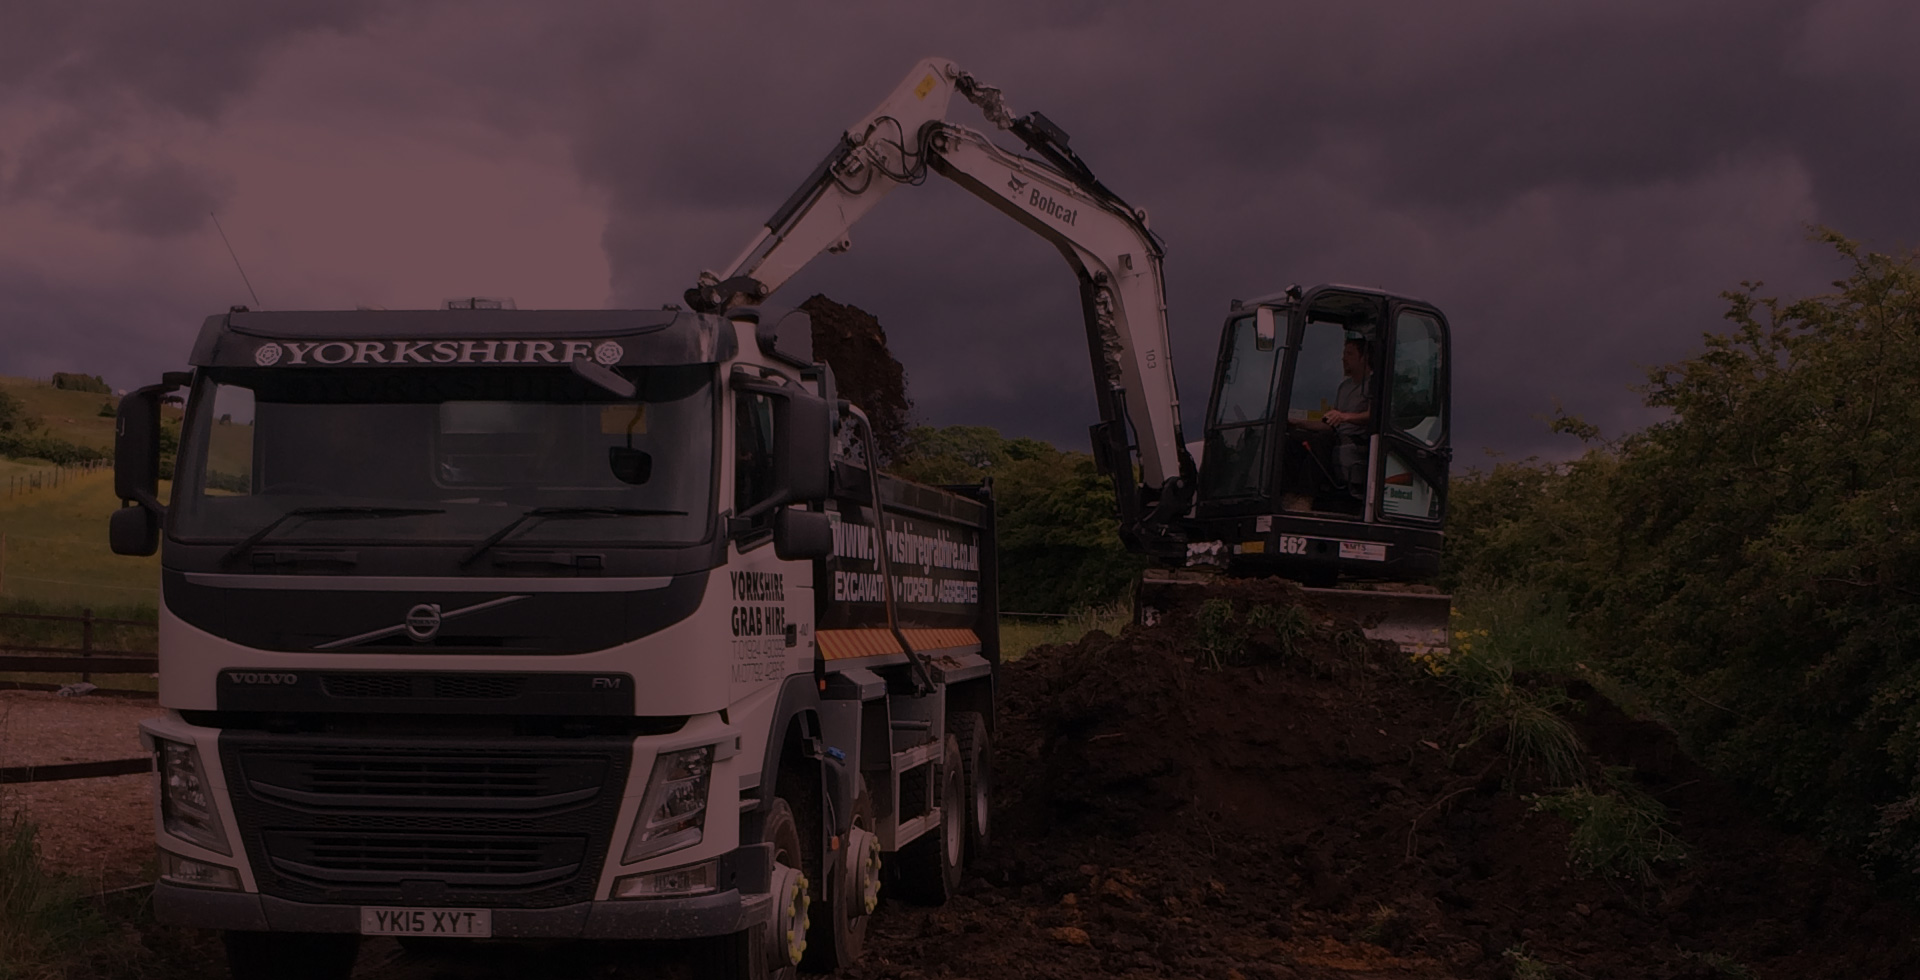 We can provide Type 1 and Type 2 crushed concrete, road planings and other aggregates.
These are good for Roads, Footpaths, Car parks, Driveways, Building bases, Hard standings and more from Yorkshire Grab Hire